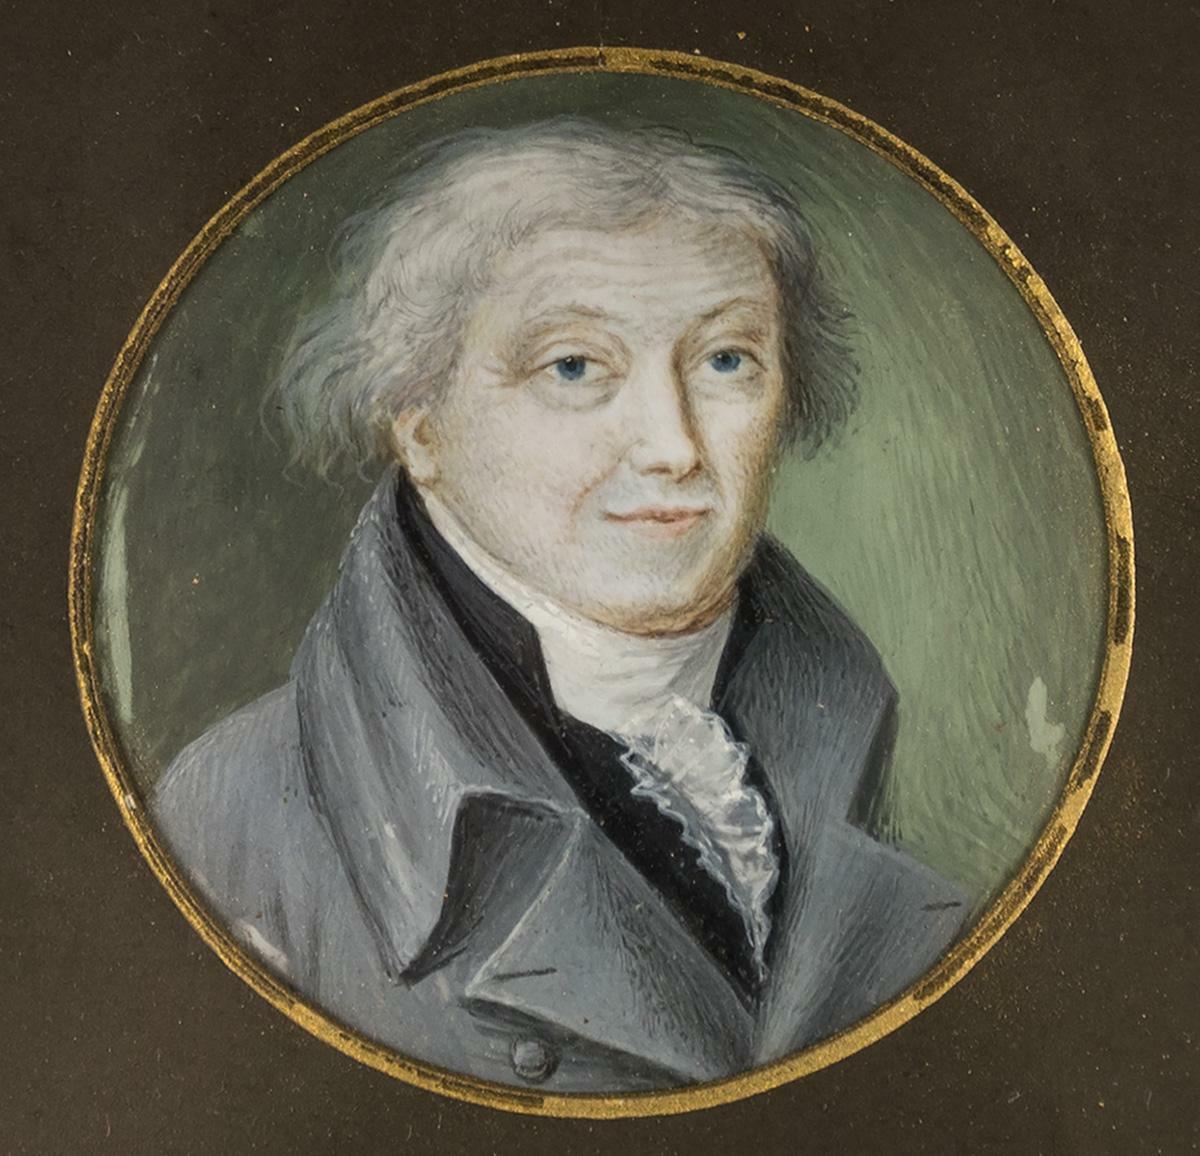 Exceptional Antique French Portrait Miniature in Fine Wood Frame, c.1800-1820